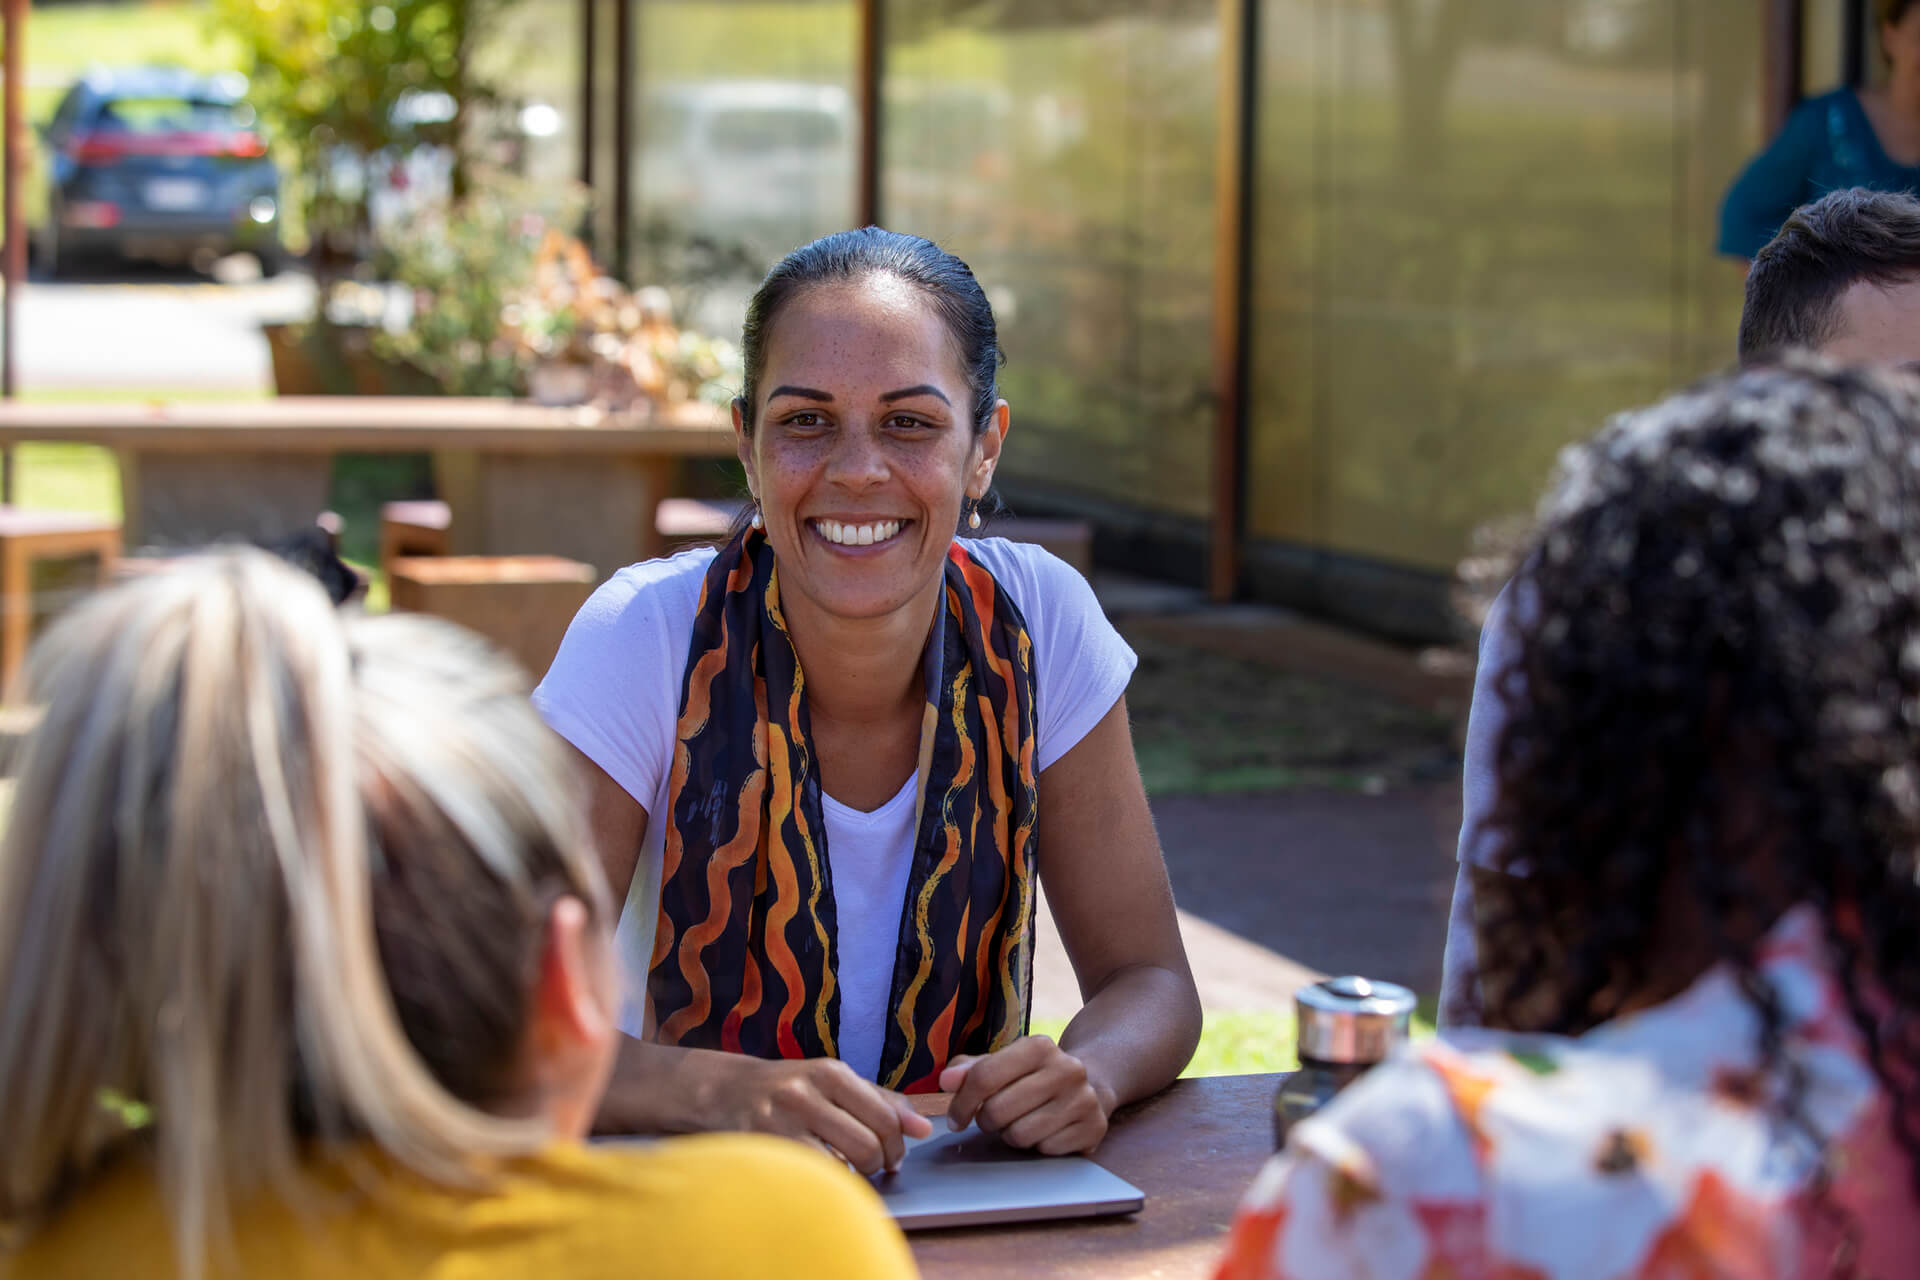 Smiling woman discussing job ideas for introverts living with ADHD with friends at a table.